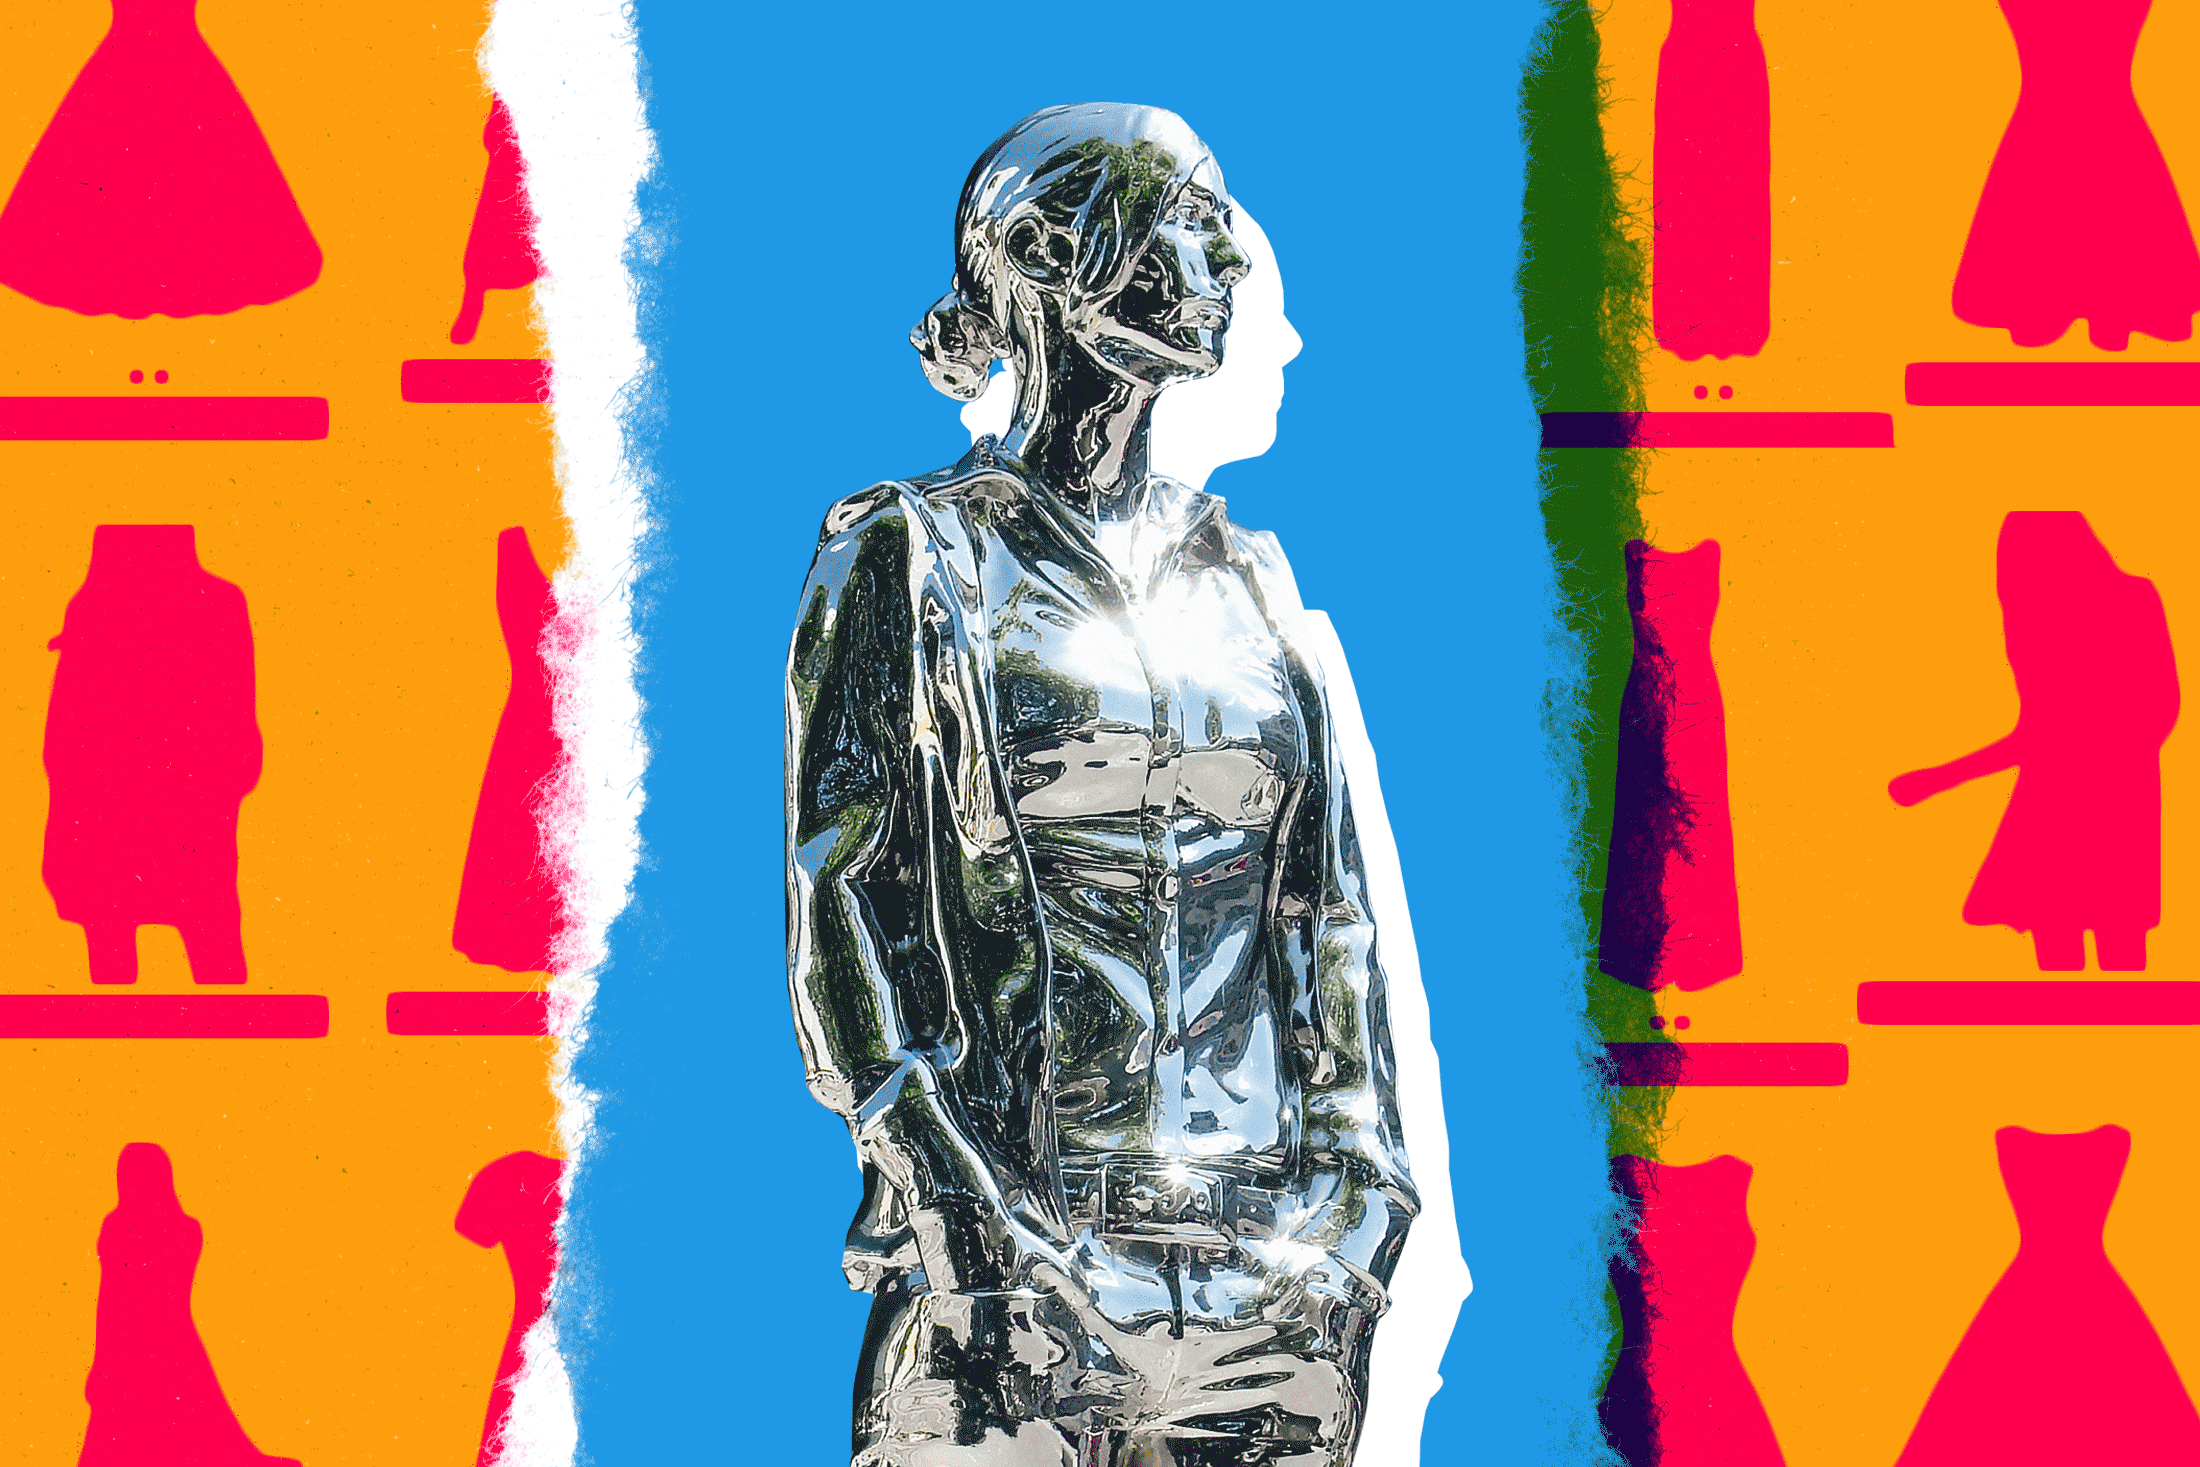 A chrome sculpture of a woman made from a 3D body scan surrounded by silhouettes of Amazon.com dresses.